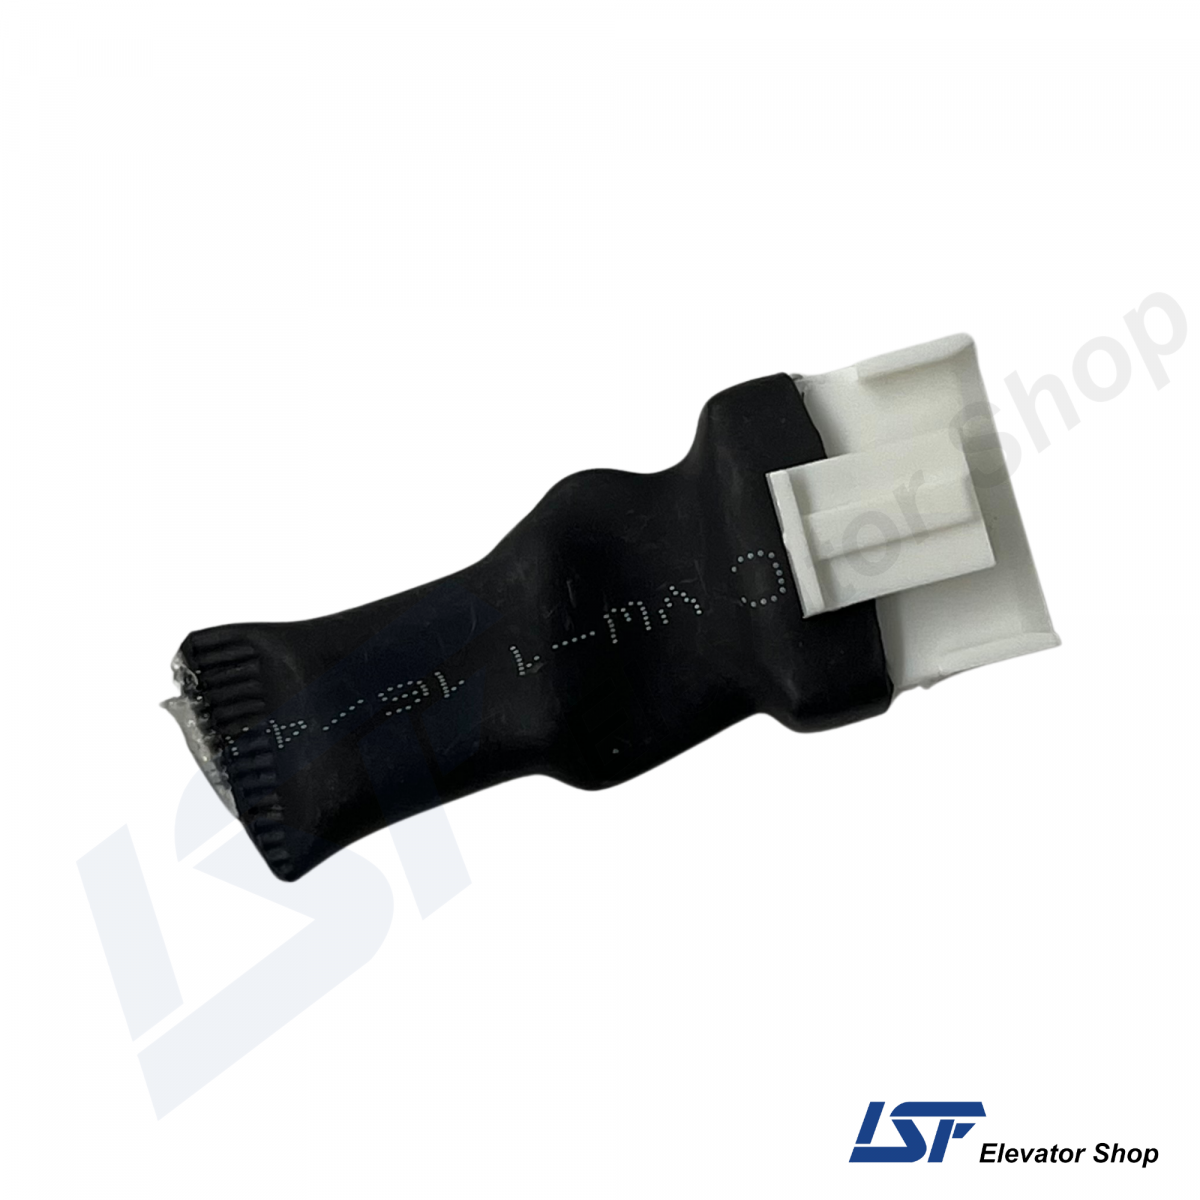 KBL-CBT Arkel Can-bus Cable for Elevator Systems (2)